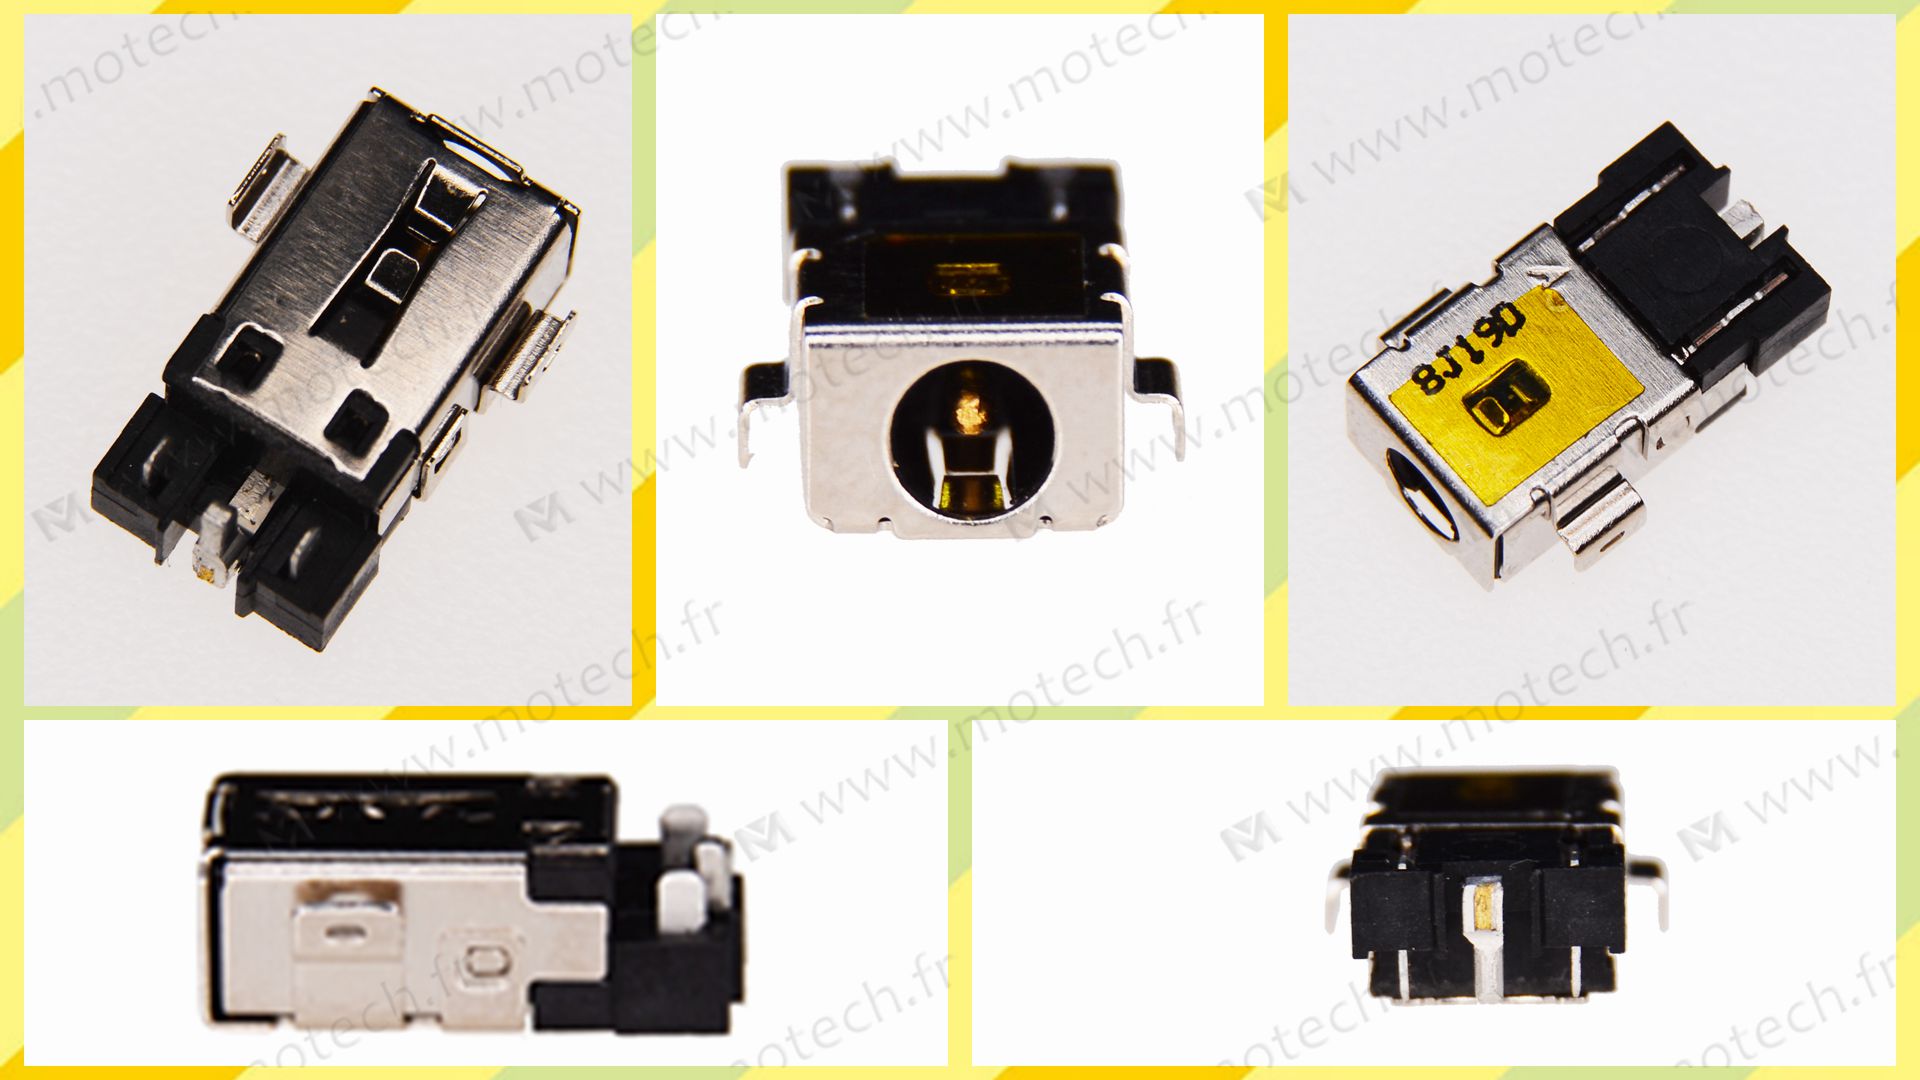 Acer A515-54G charging connector, Acer A515-54G DC Power Jack, Acer A515-54G Power Jack, Acer A515-54G plug, Acer A515-54G Jack socket, Acer A515-54G connecteur de charge, 